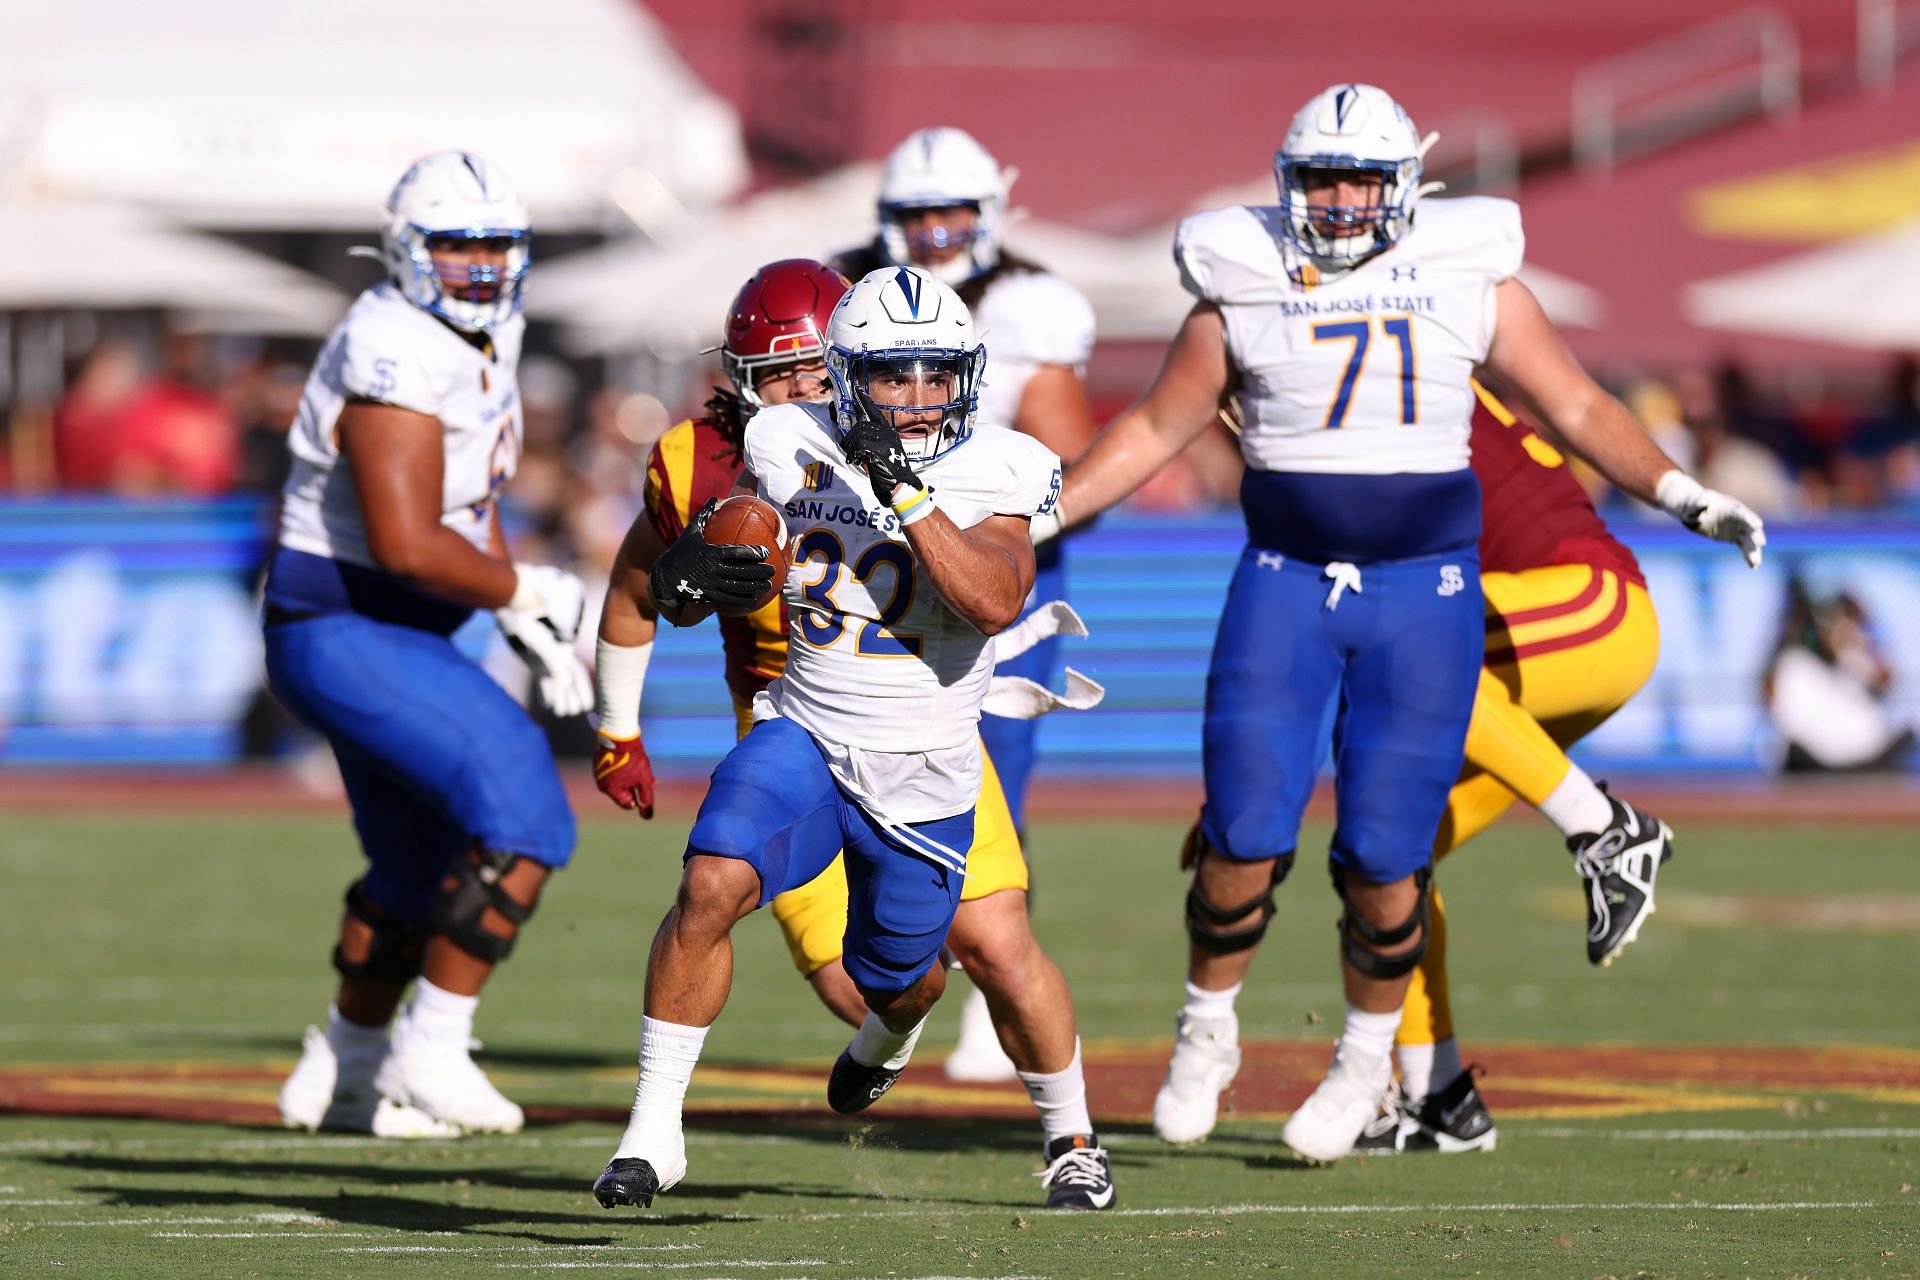 At times, the upset seemed between reach for San Jose State